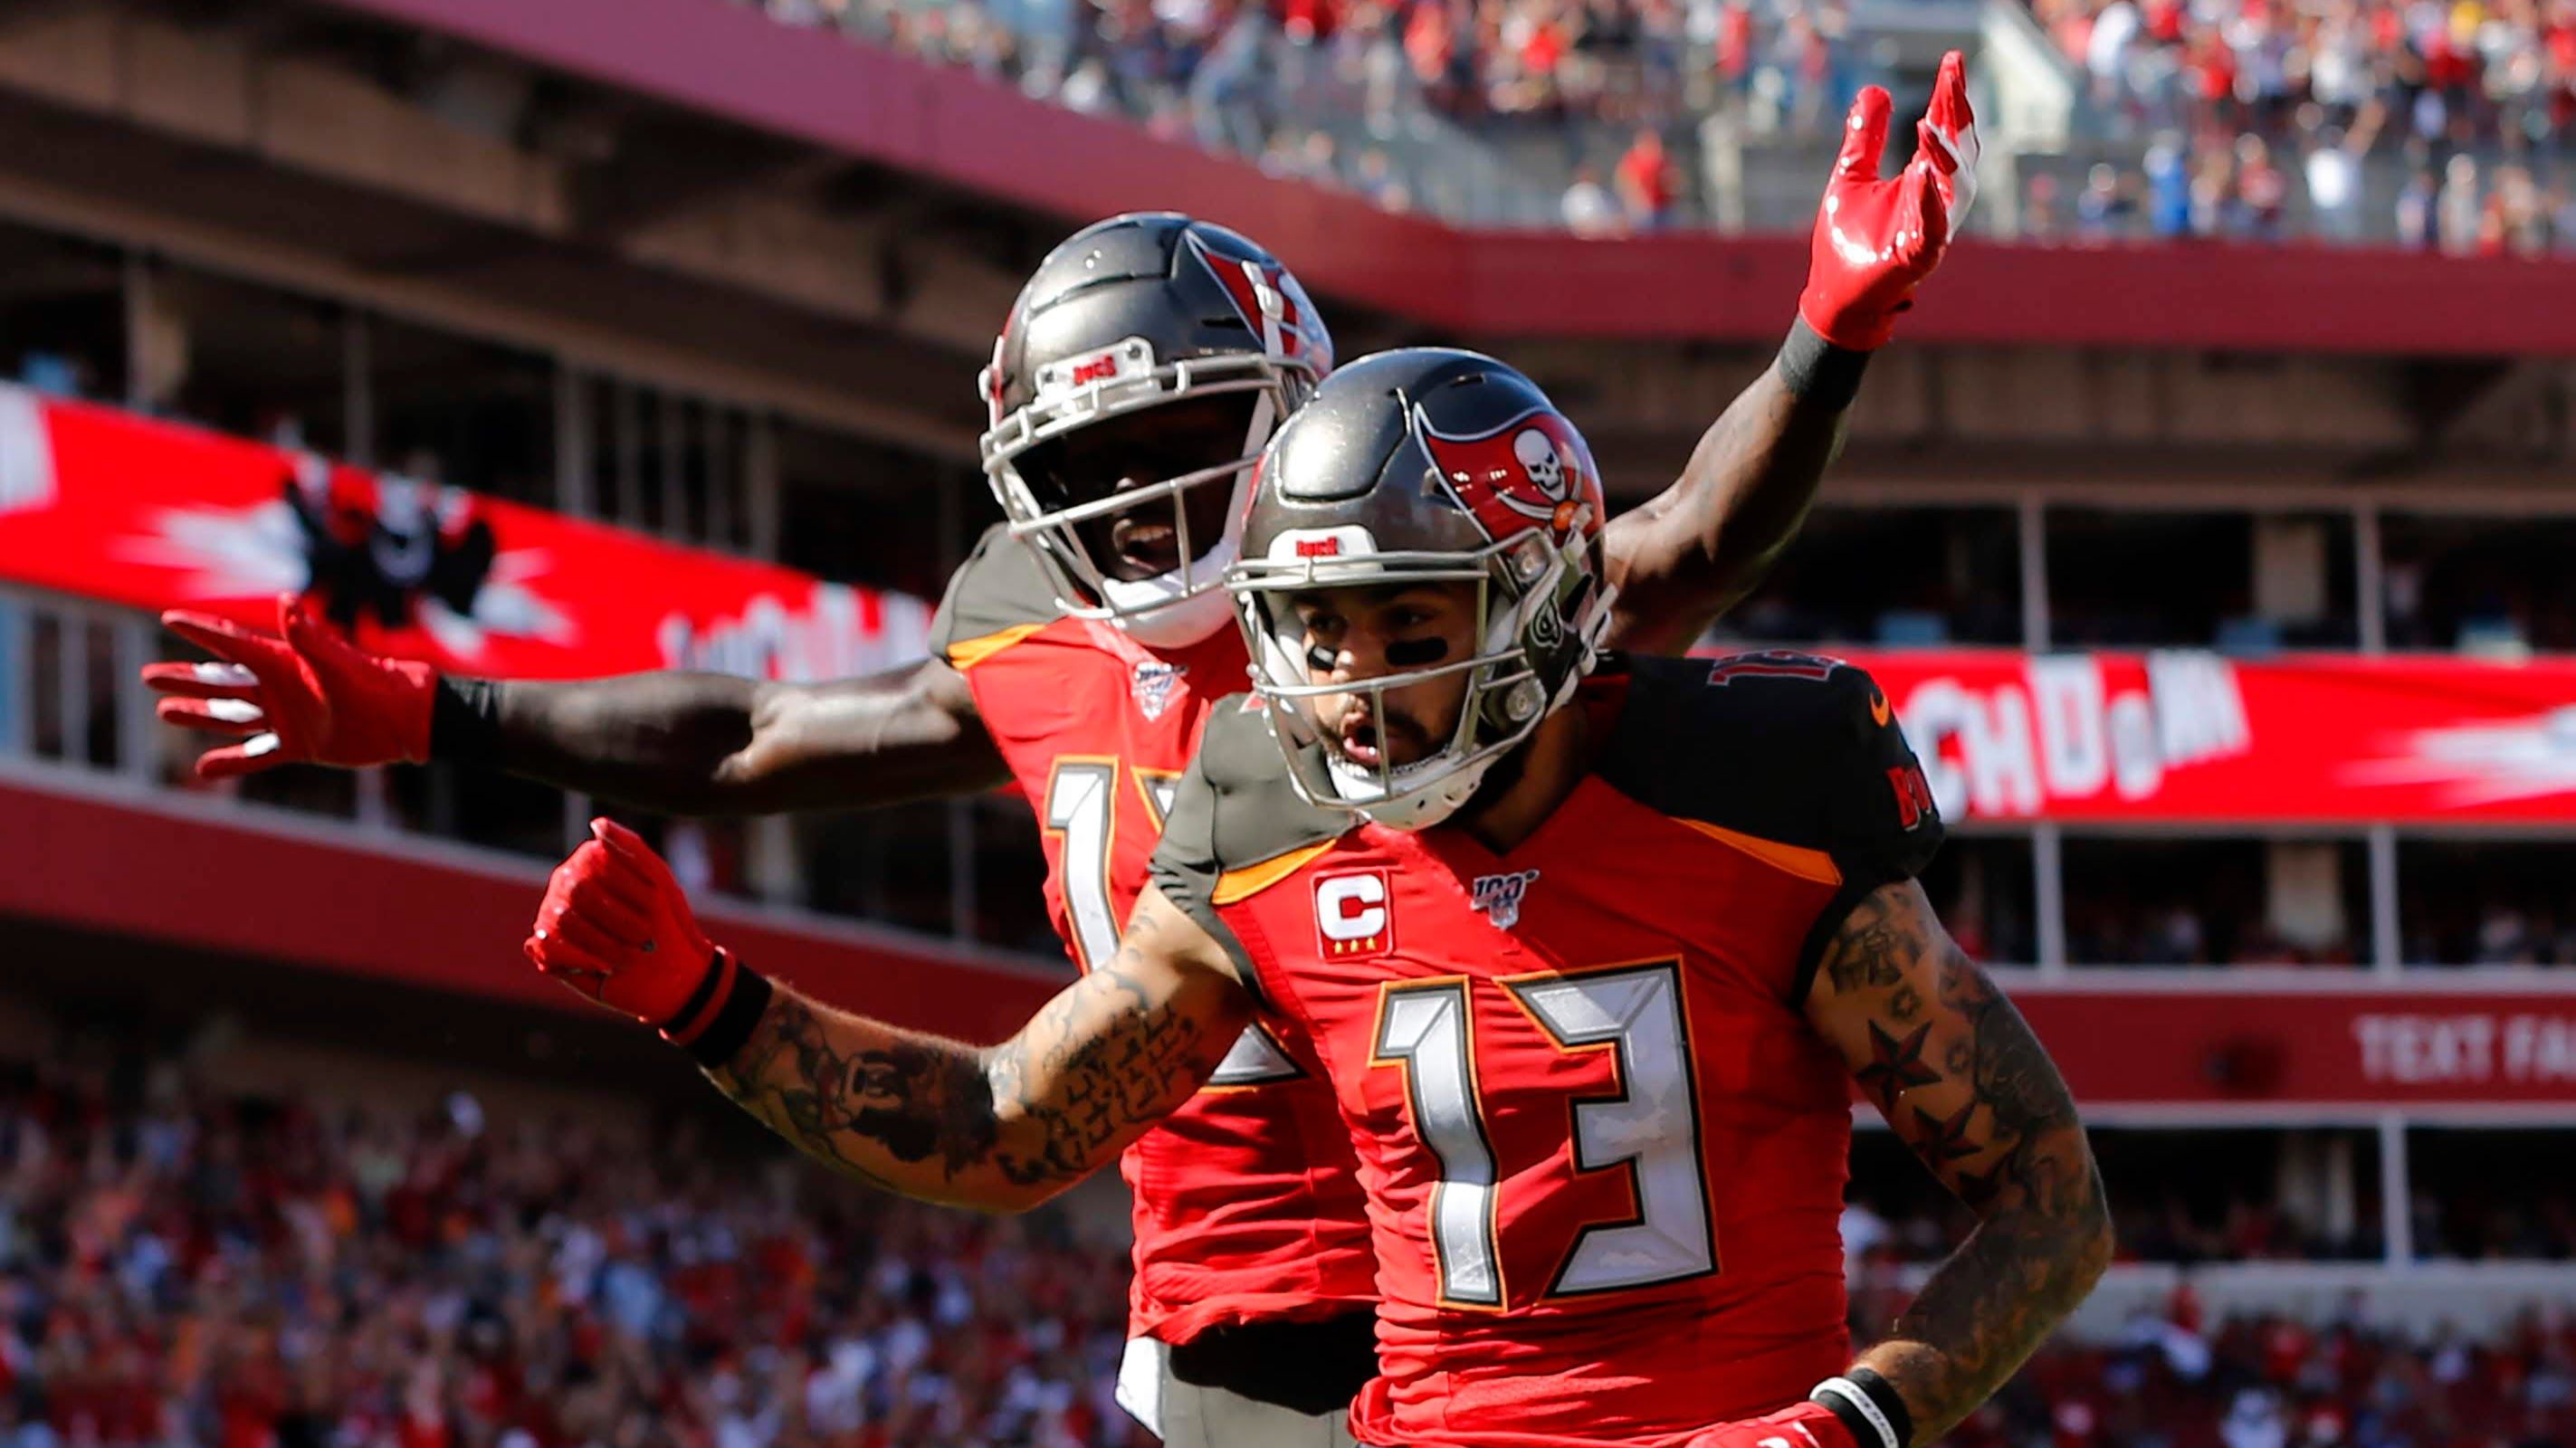 Call the Bucs' Mike Evans, Chris Godwin the 'Bruise Brothers'